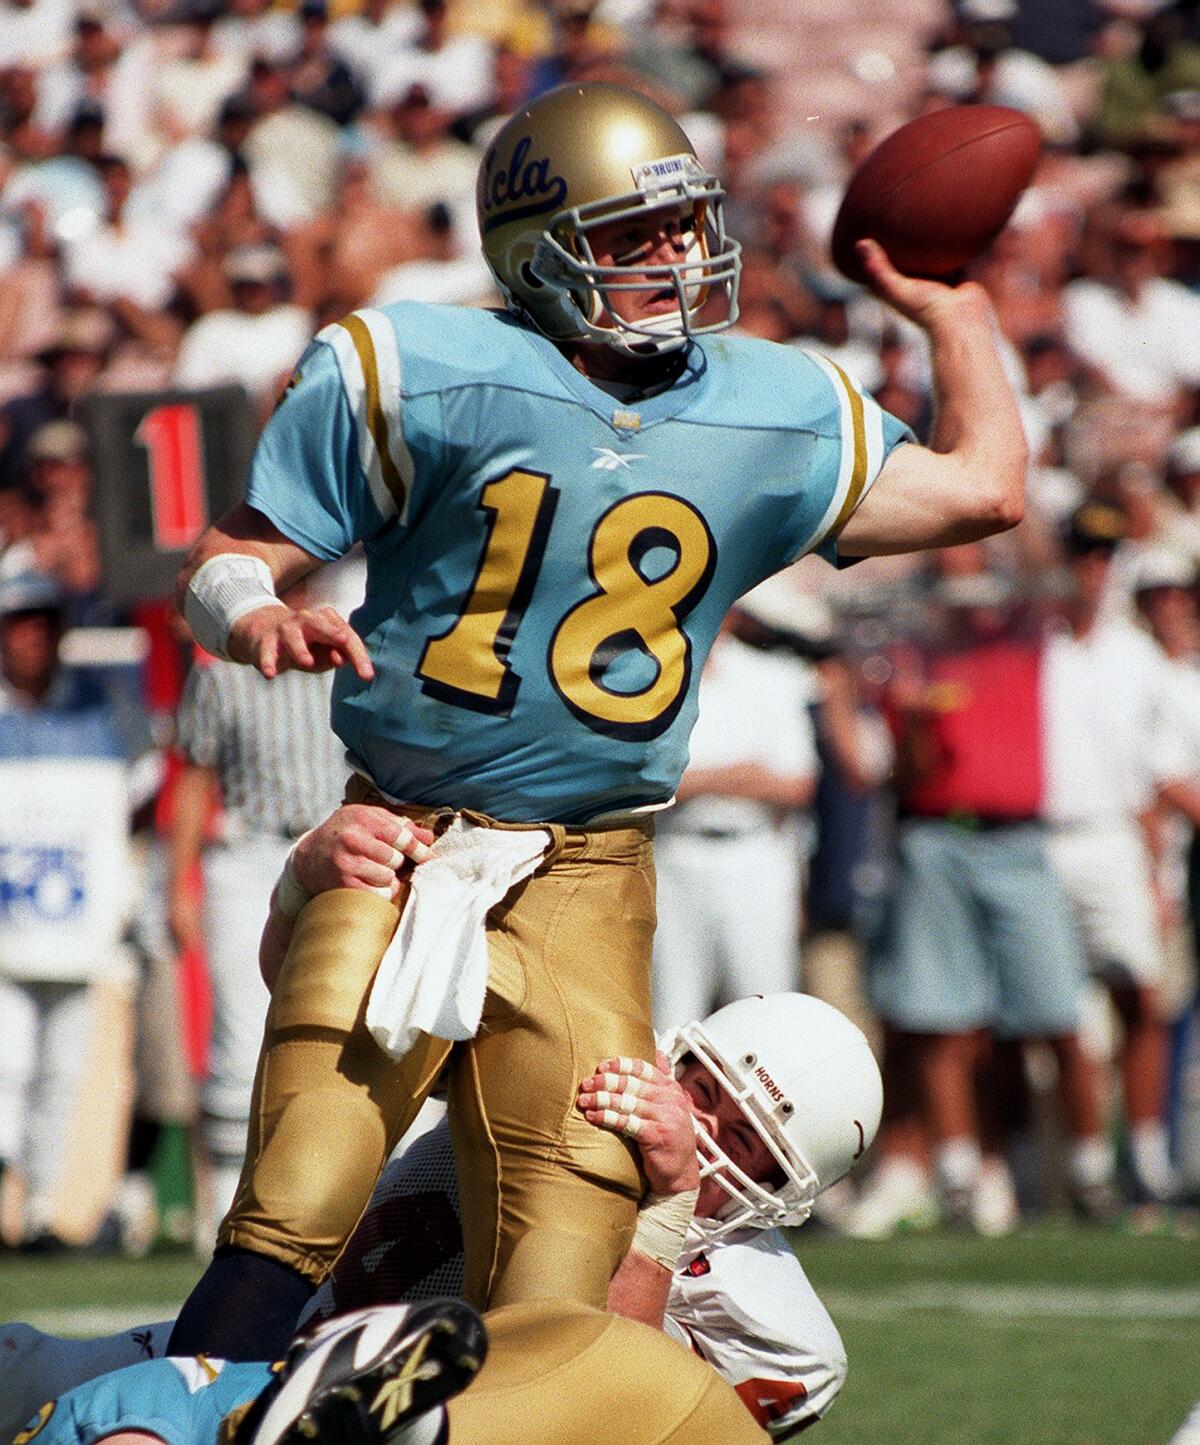 UCLA's Cade NcNown throws a pass against Texas in September 1998.